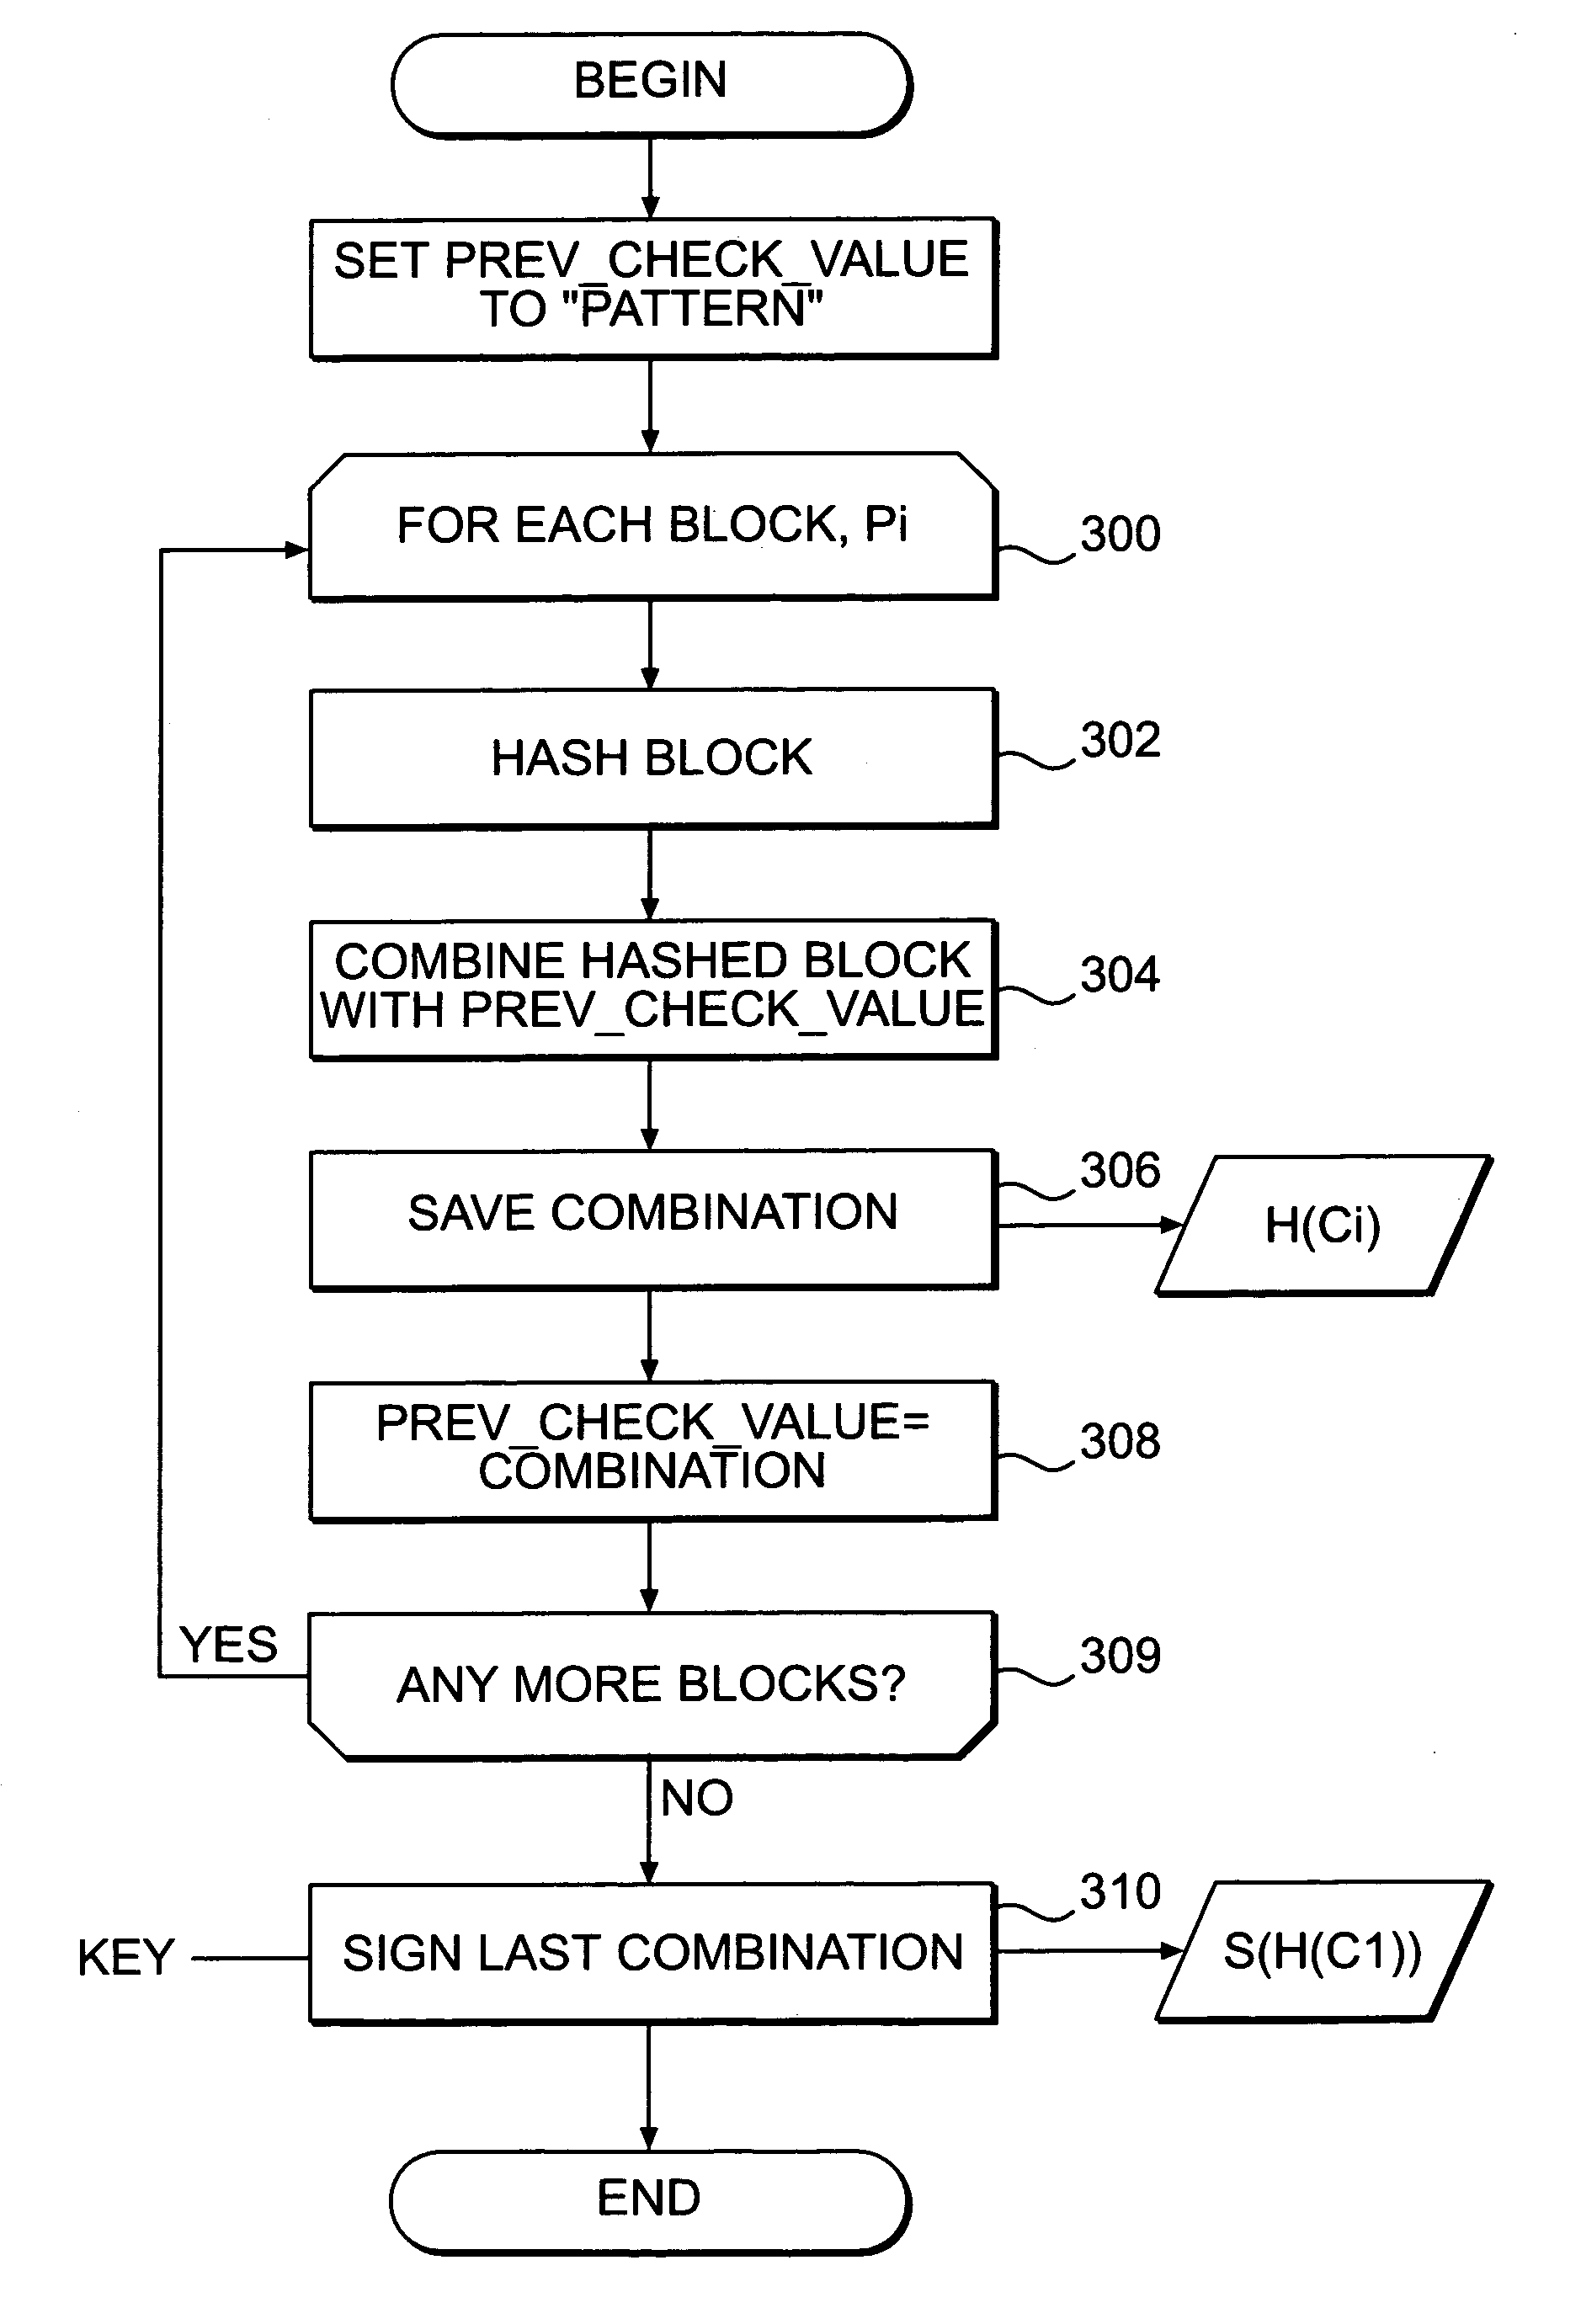 Systems and methods for authenticating and protecting the integrity of data streams and other data